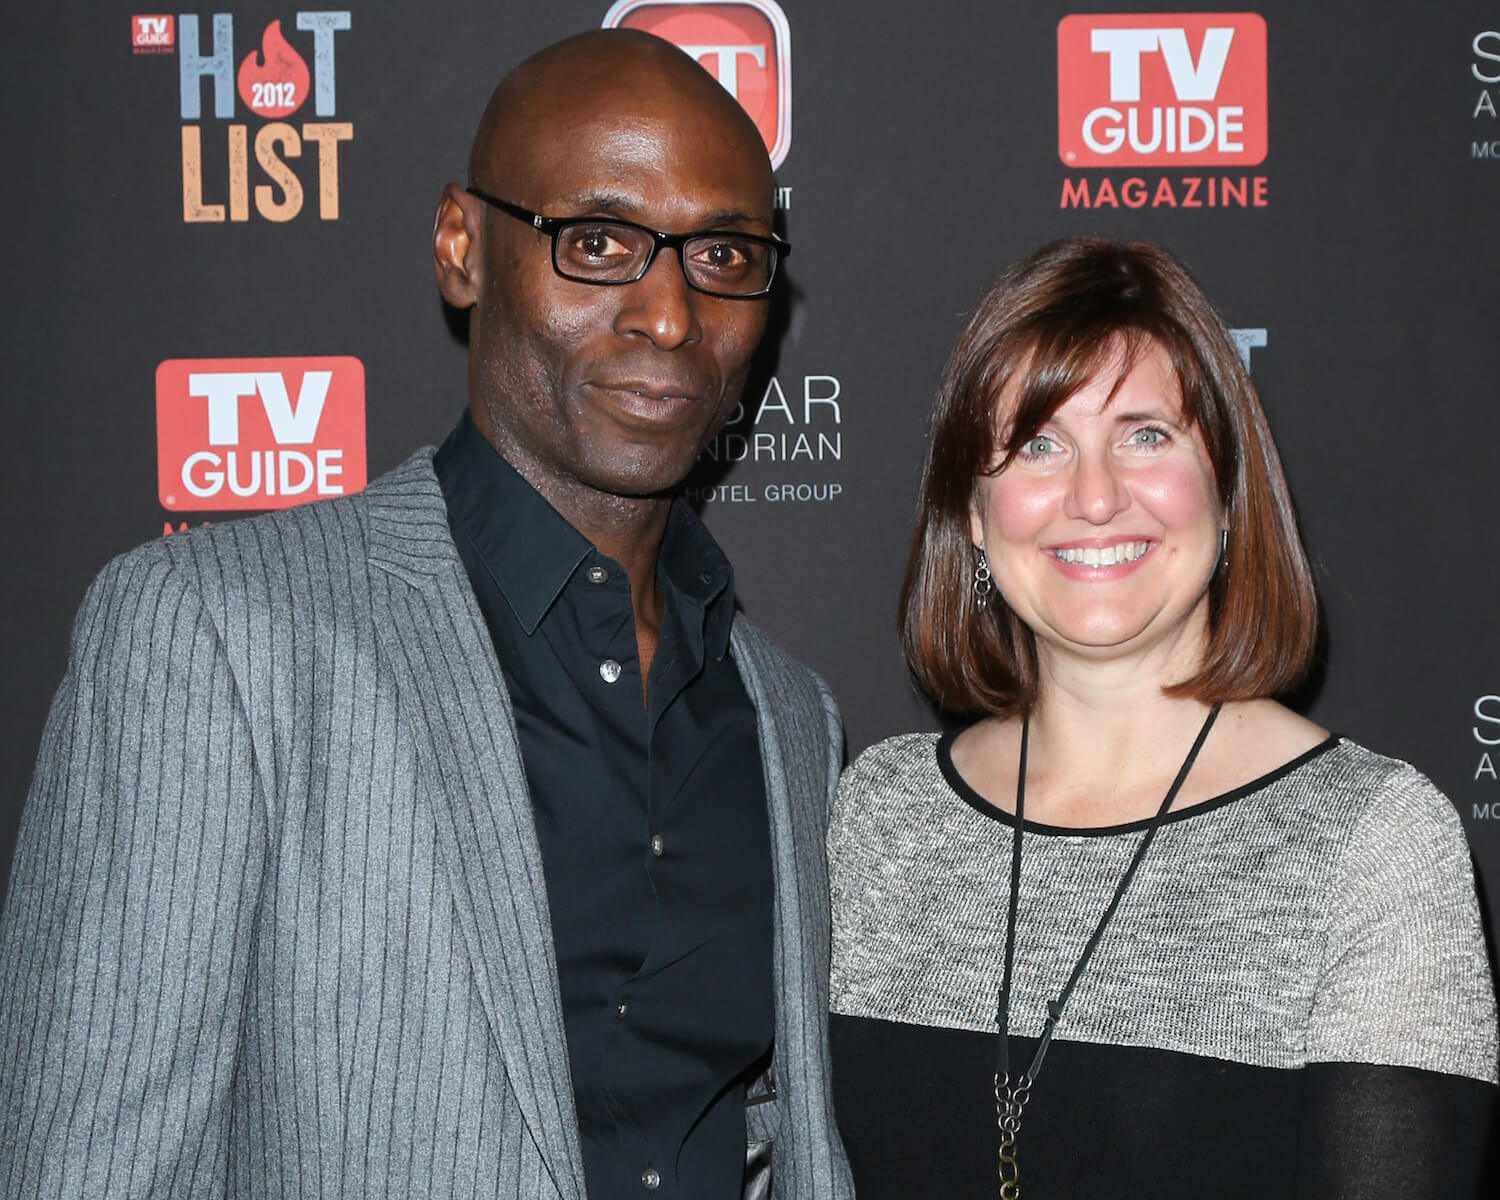 Lance Reddick with his wife Stephanie Reddick at an event